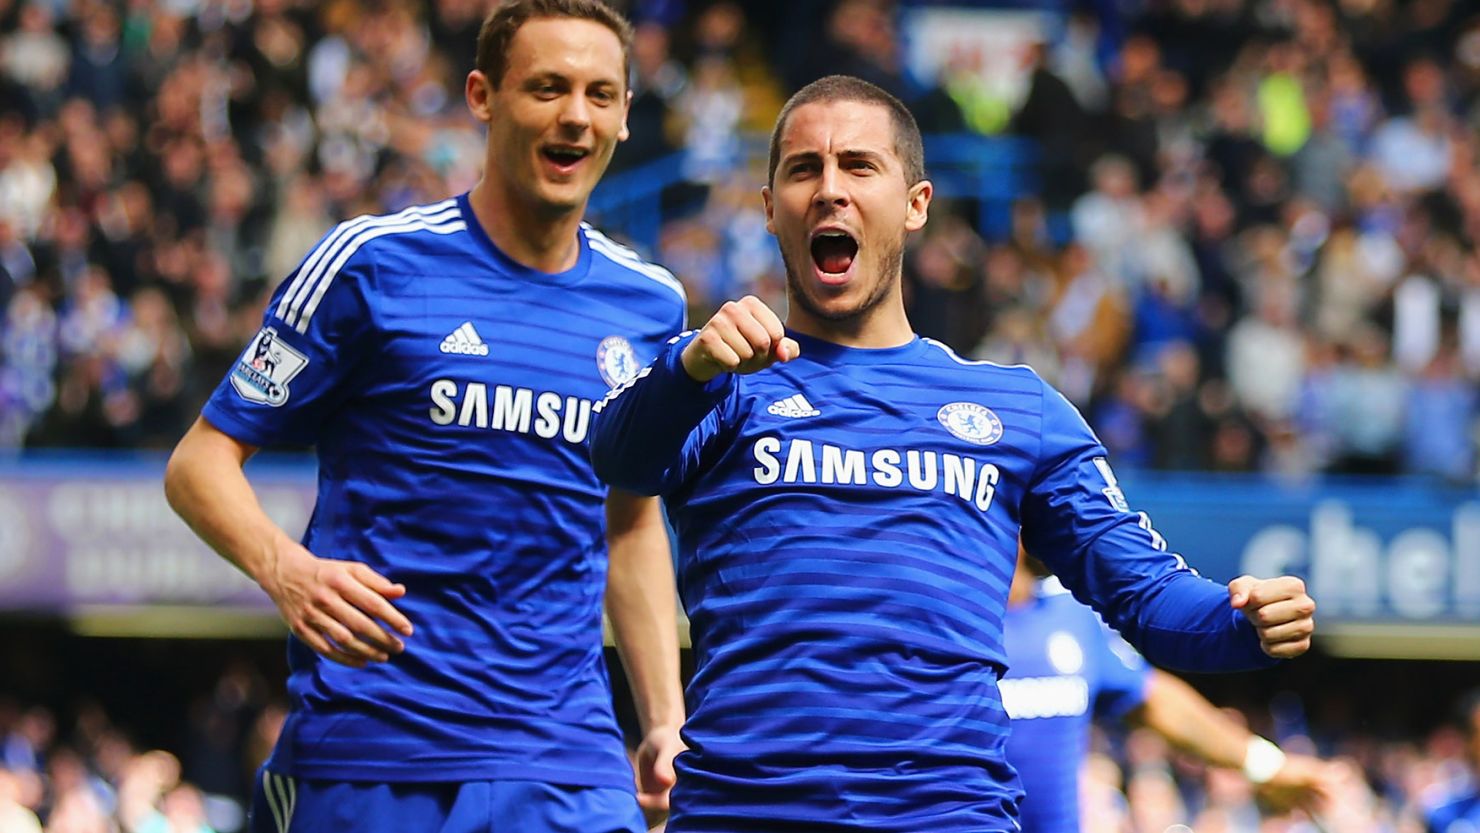 "Football gives and takes away": Chelsea FC player Eden Hazard after his EPL title-clinching goal last season. 